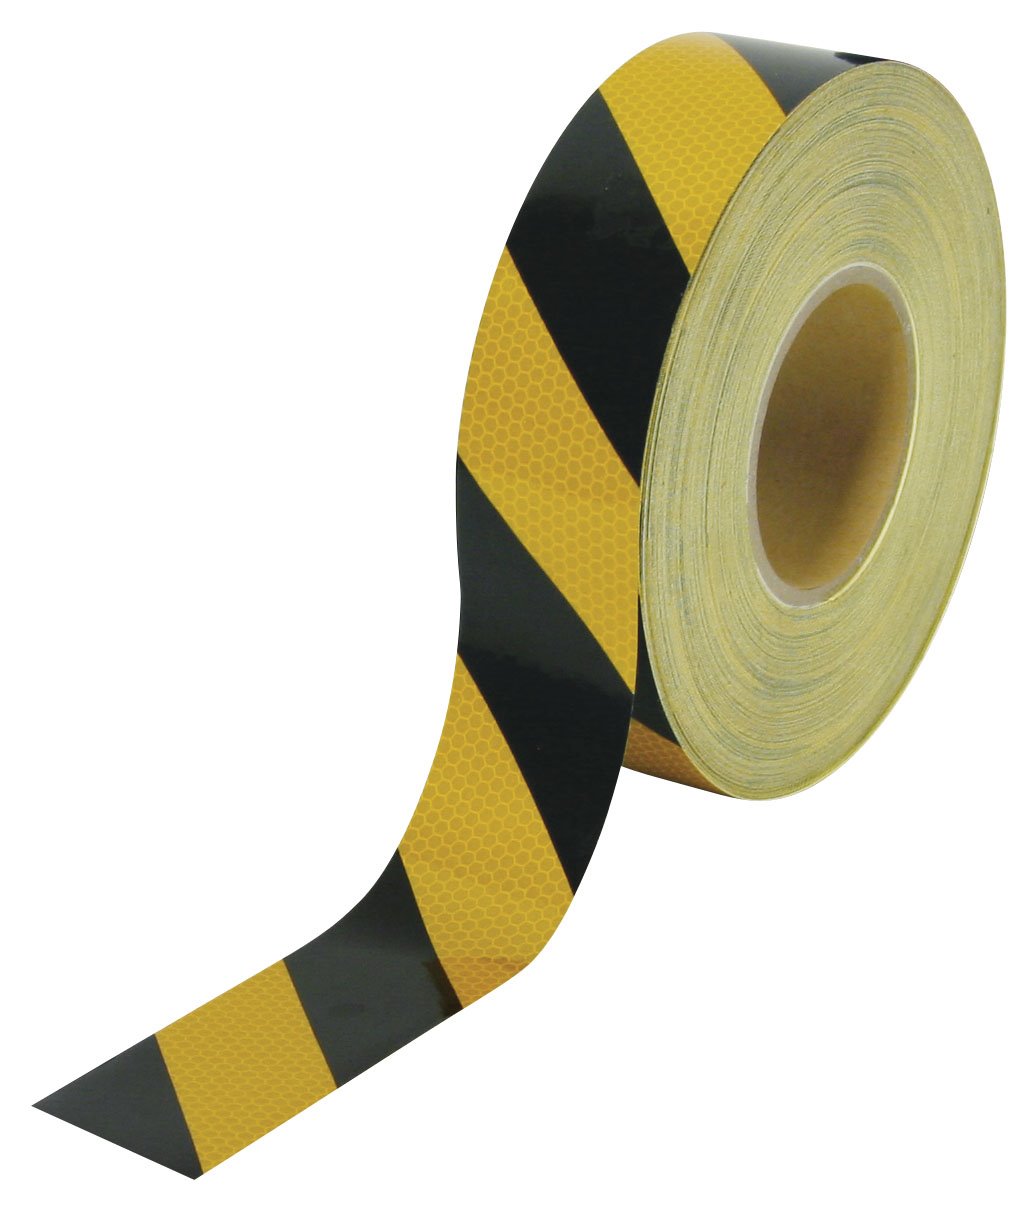 Reflective Tape Black/Yell – TranEx road safety and traffic control